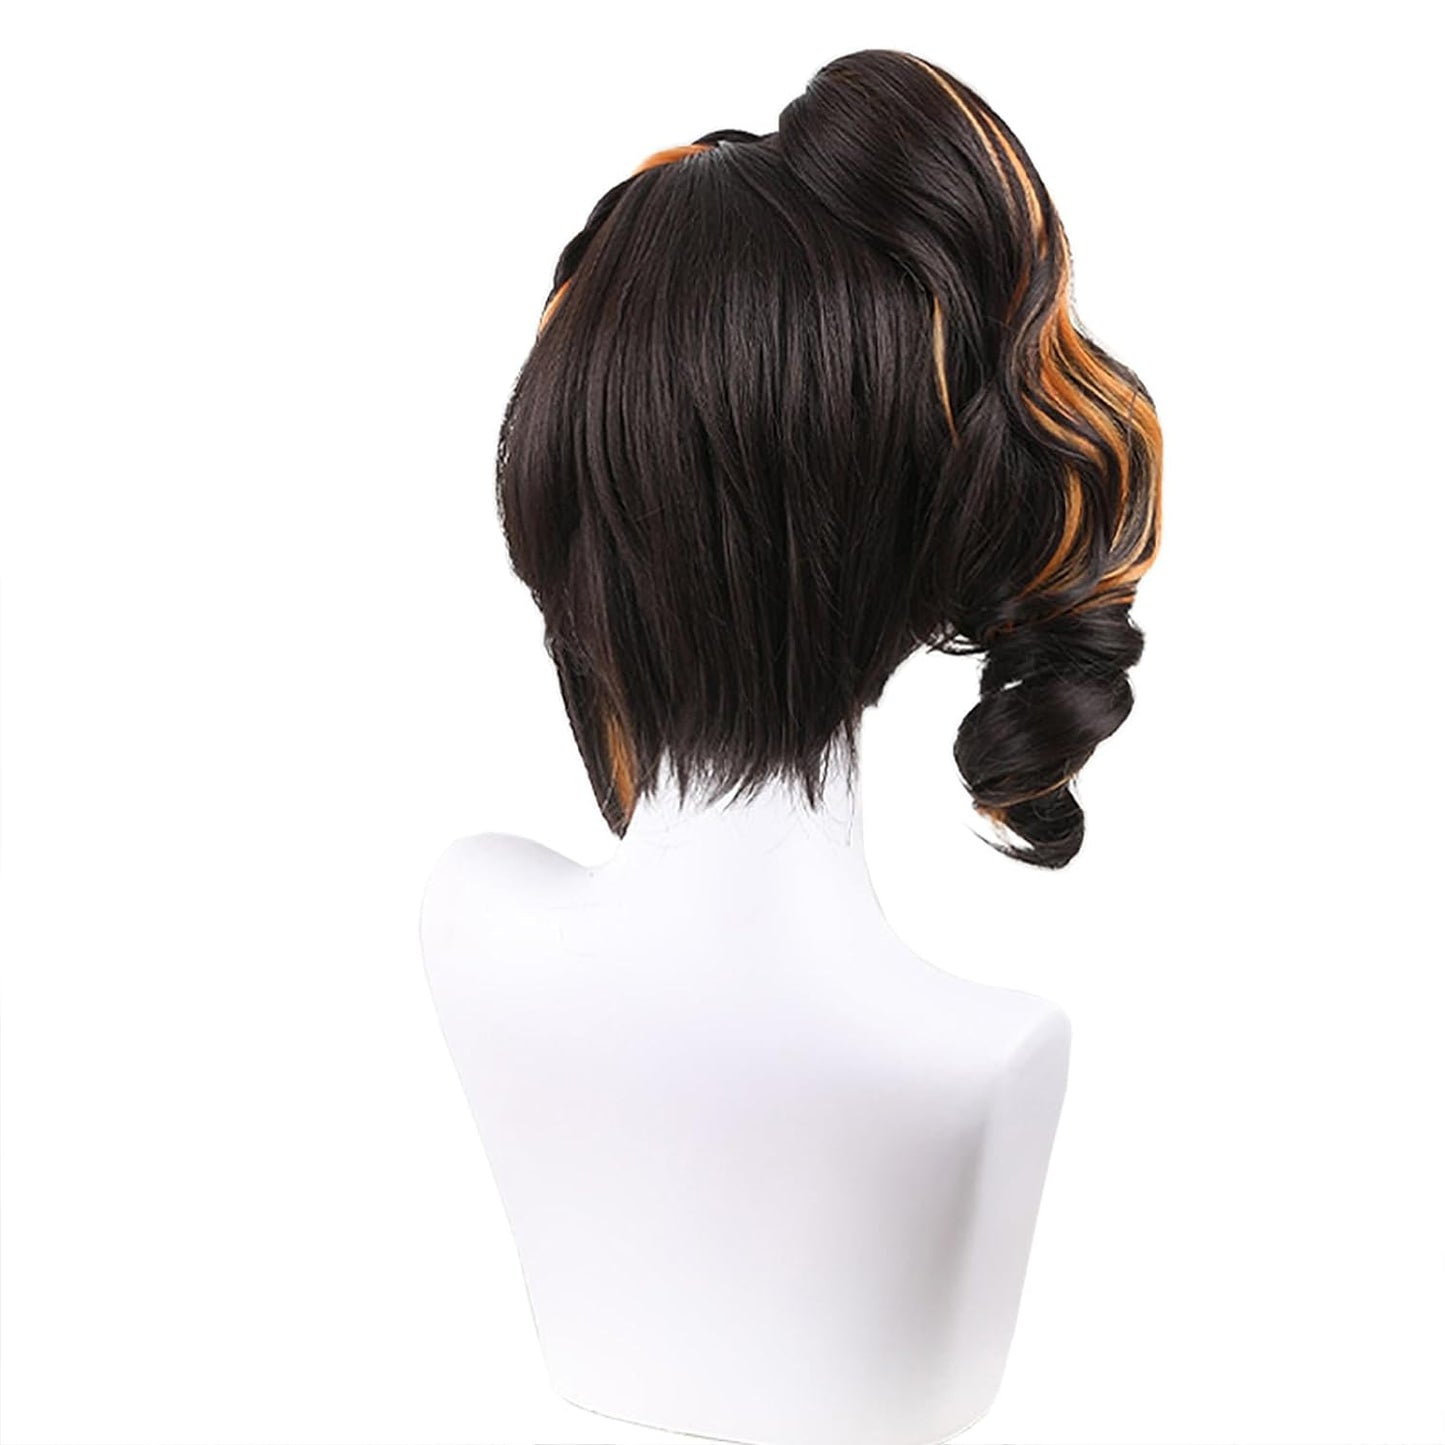 Brown Long Wavy Chiori Cosplay Wig With Pigtail